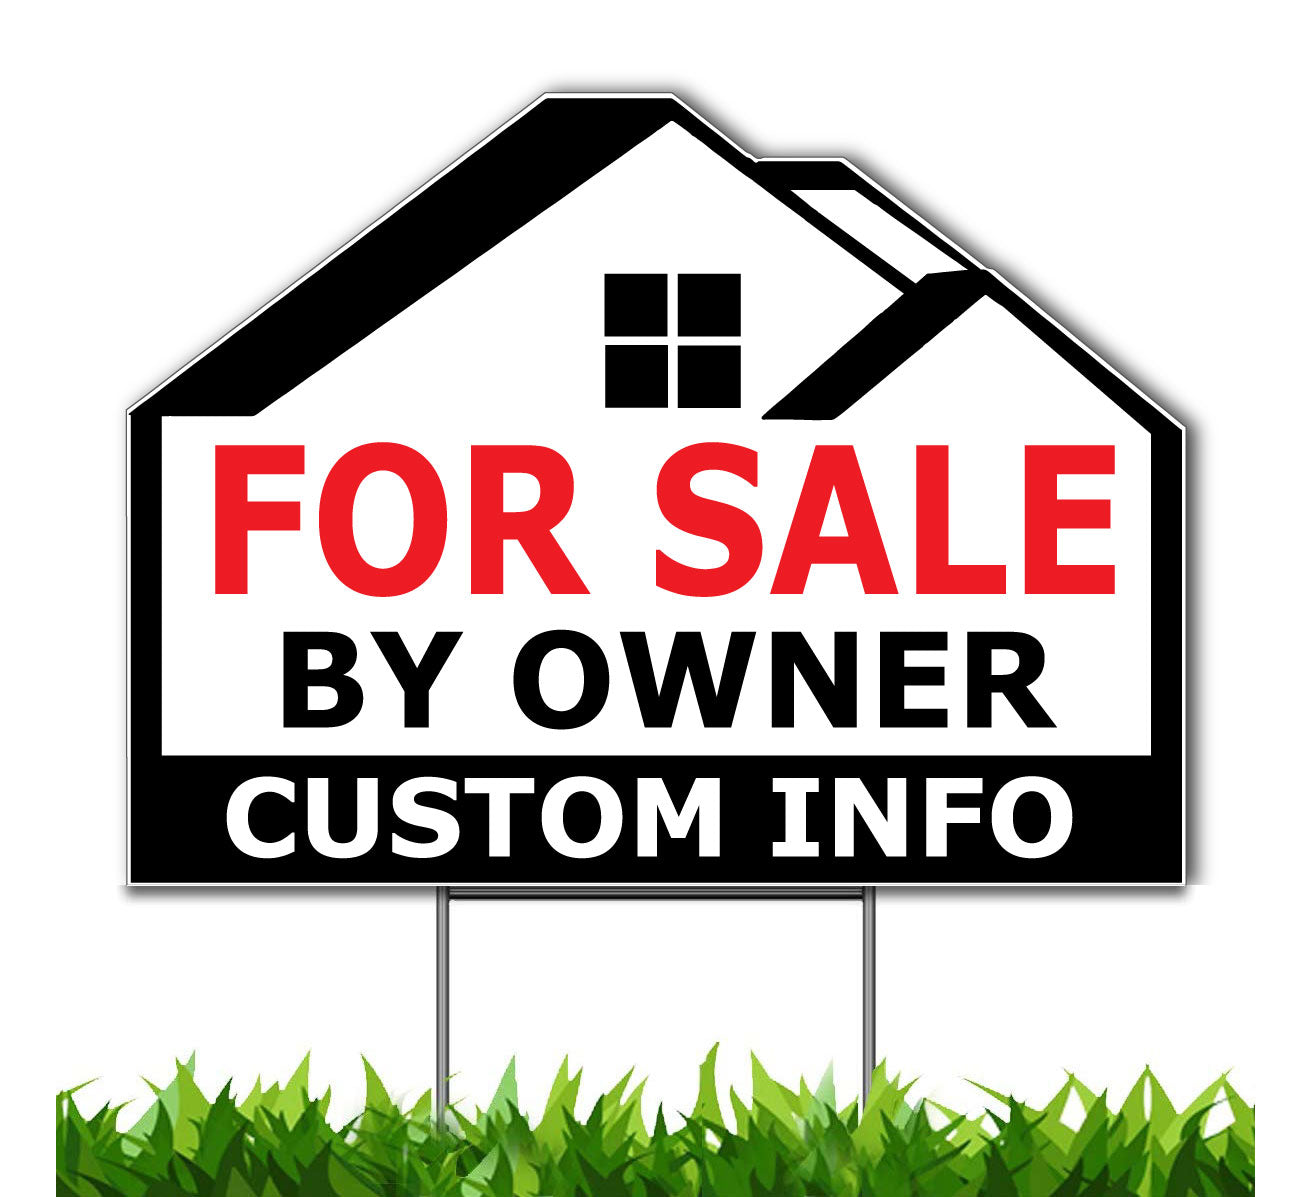 For Sale By Owner Custom Yard Sign, Die Cut to House Shape, 18x24 Inch Yard Sign, Single Side Print, Outdoor, Weatherproof Corrugated Plastic, Metal H-Stake Included, v2